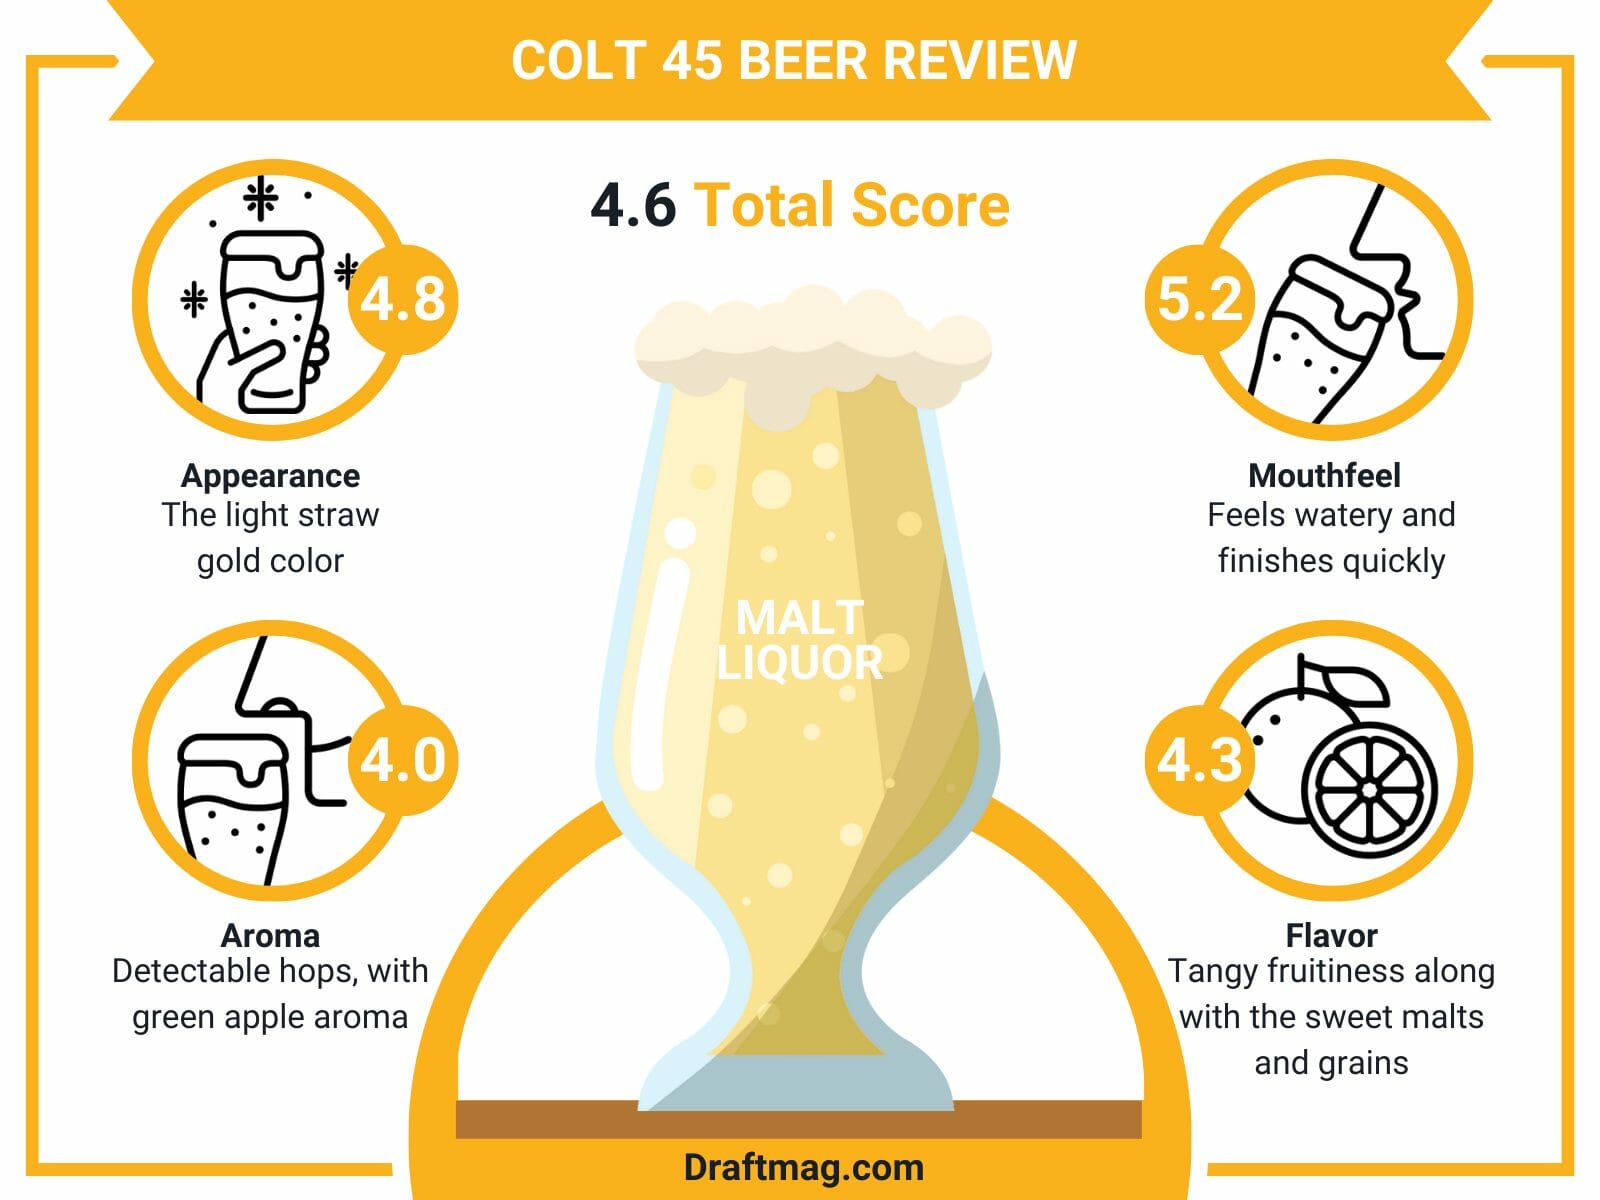 Colt beer review infographic